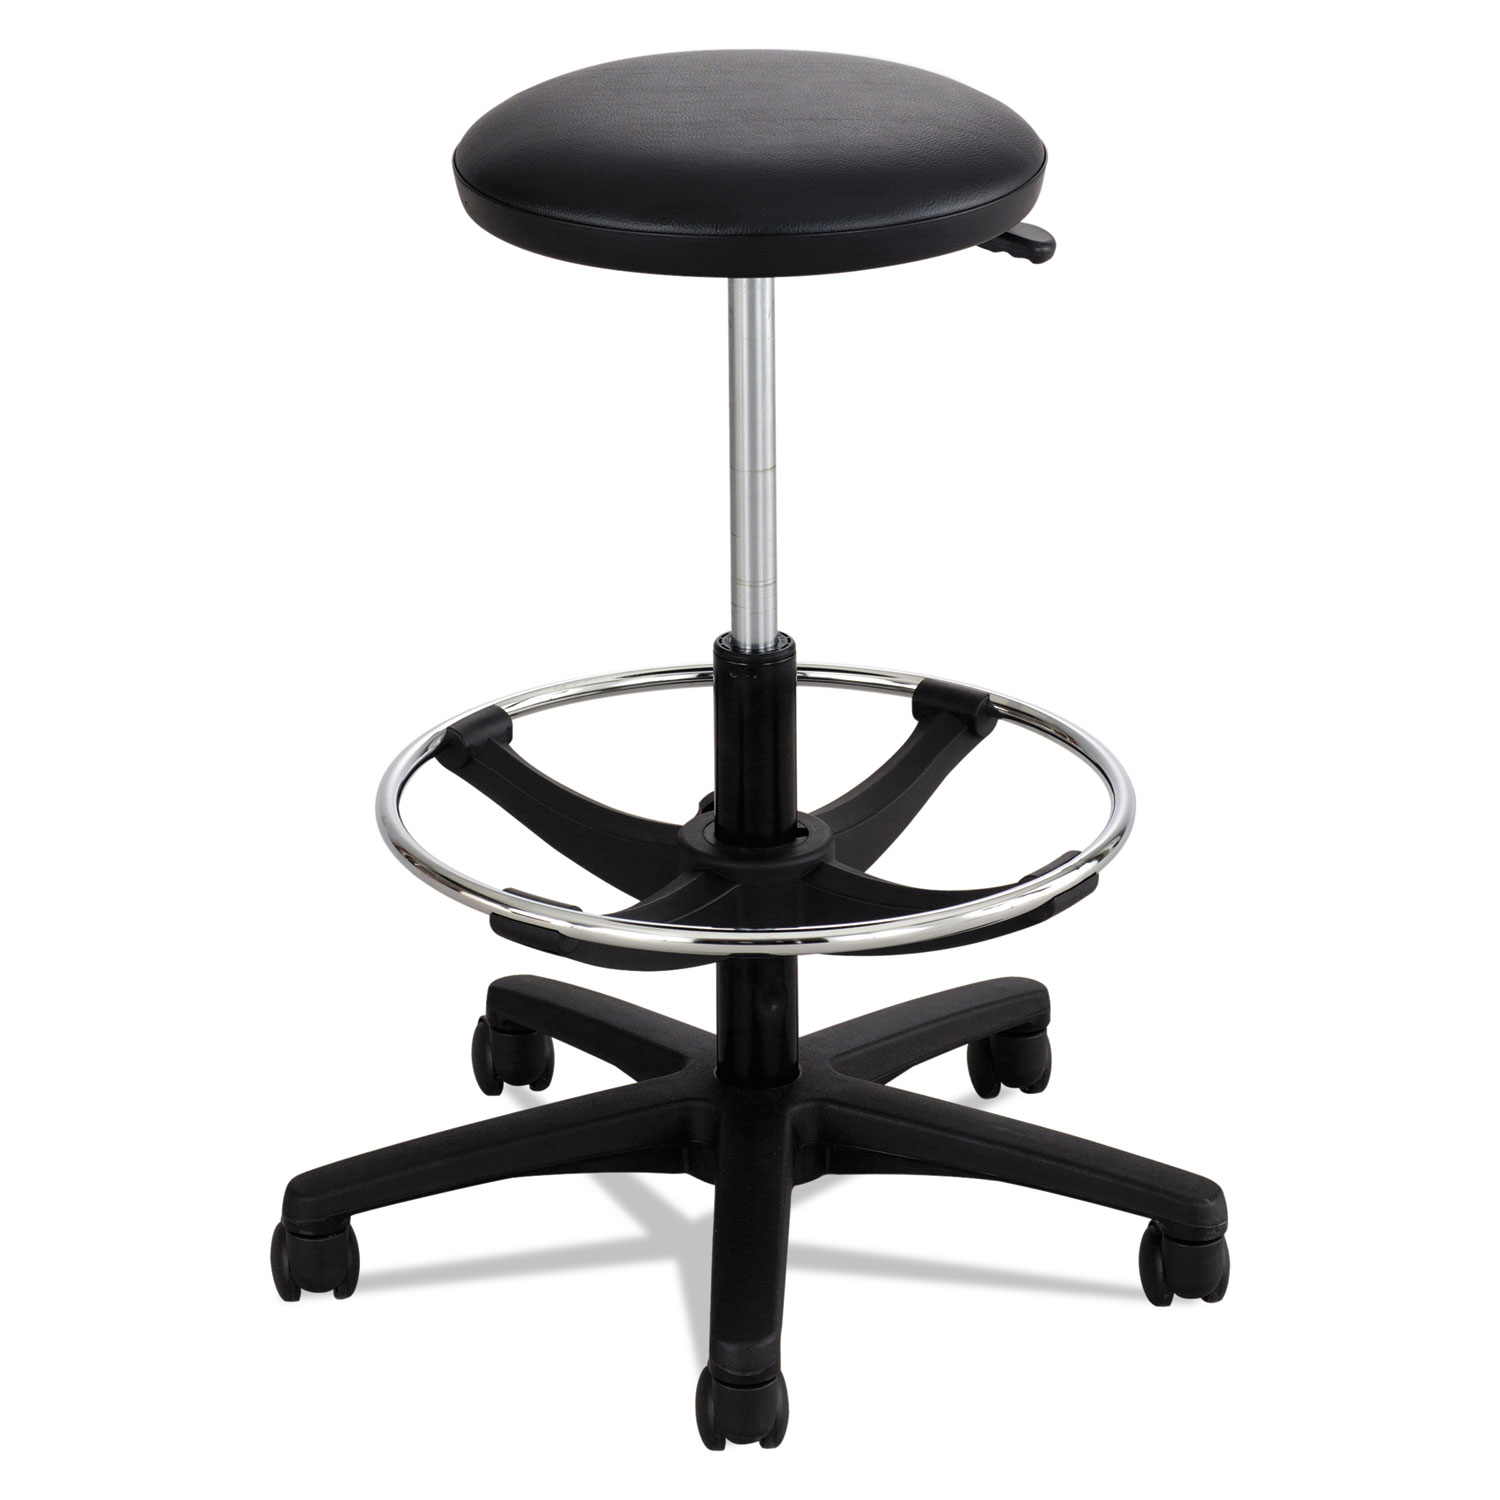  Safco 3436BL Extended-Height Lab Stool, 32 Seat Height, Supports up to 250 lbs., Black Seat/Black Back, Black Base (SAF3436BL) 